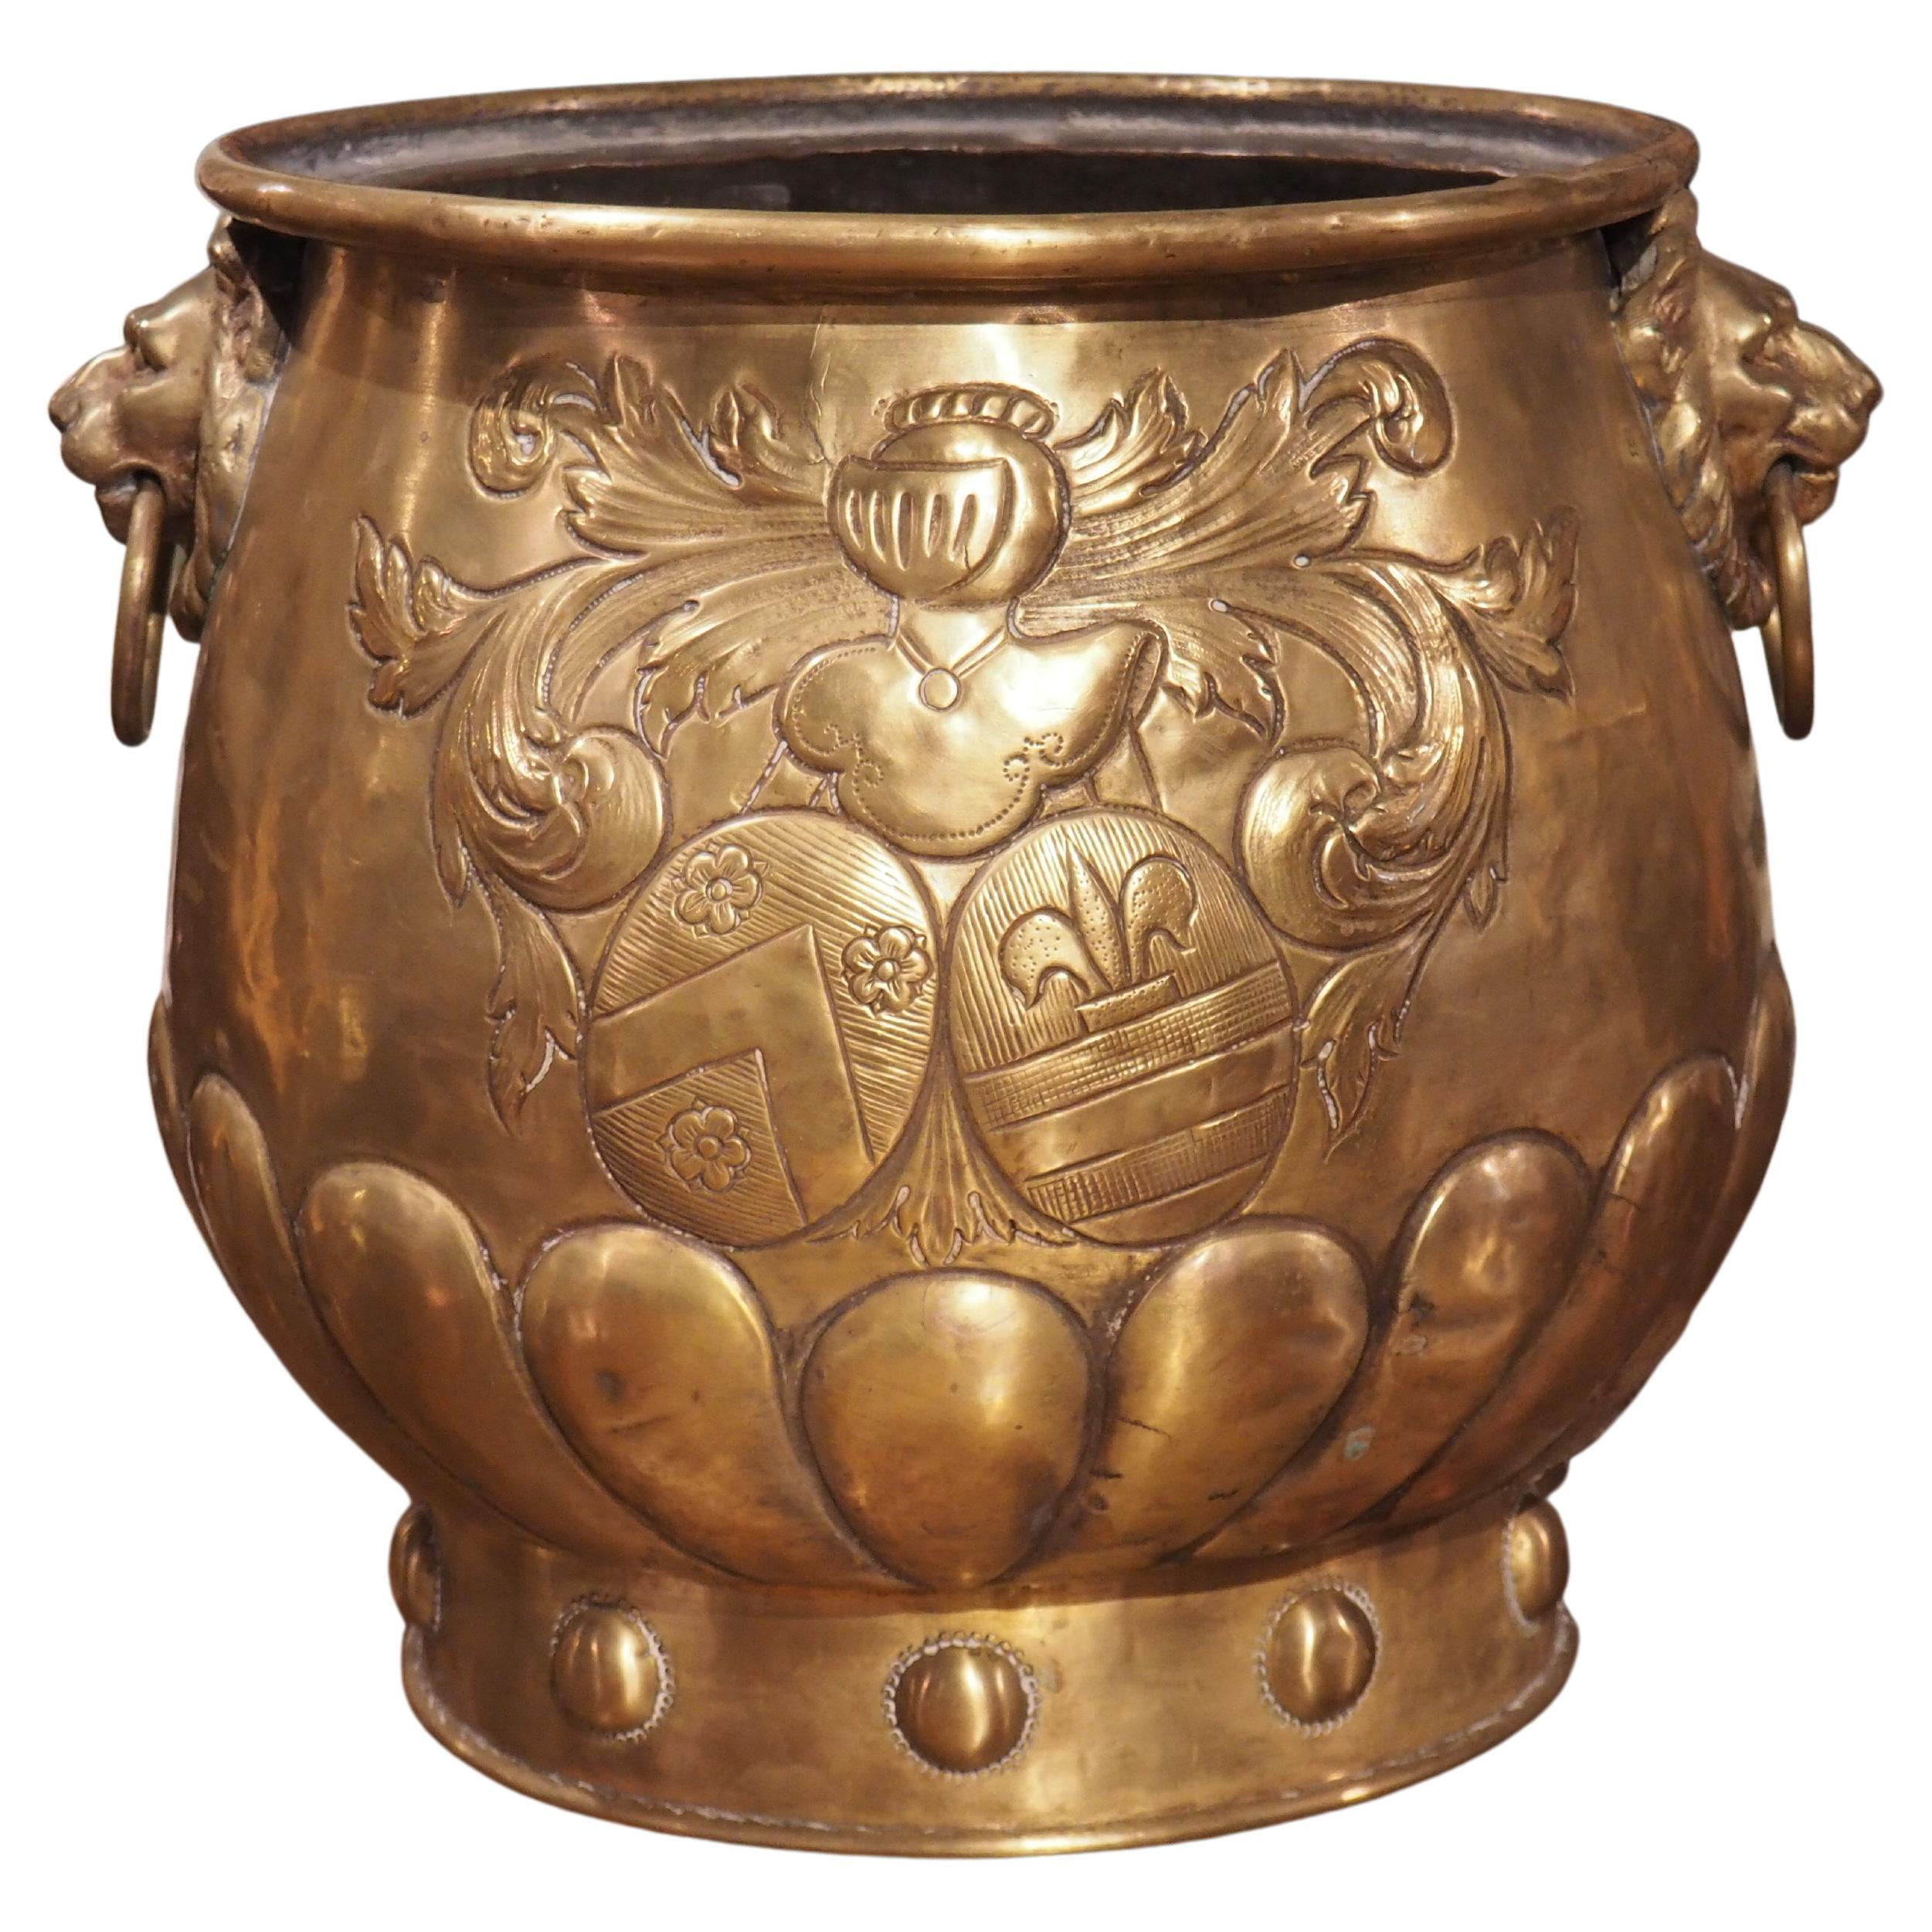 19th Century French Brass Repousse Cachepot with Coats of Arms and Lions For Sale